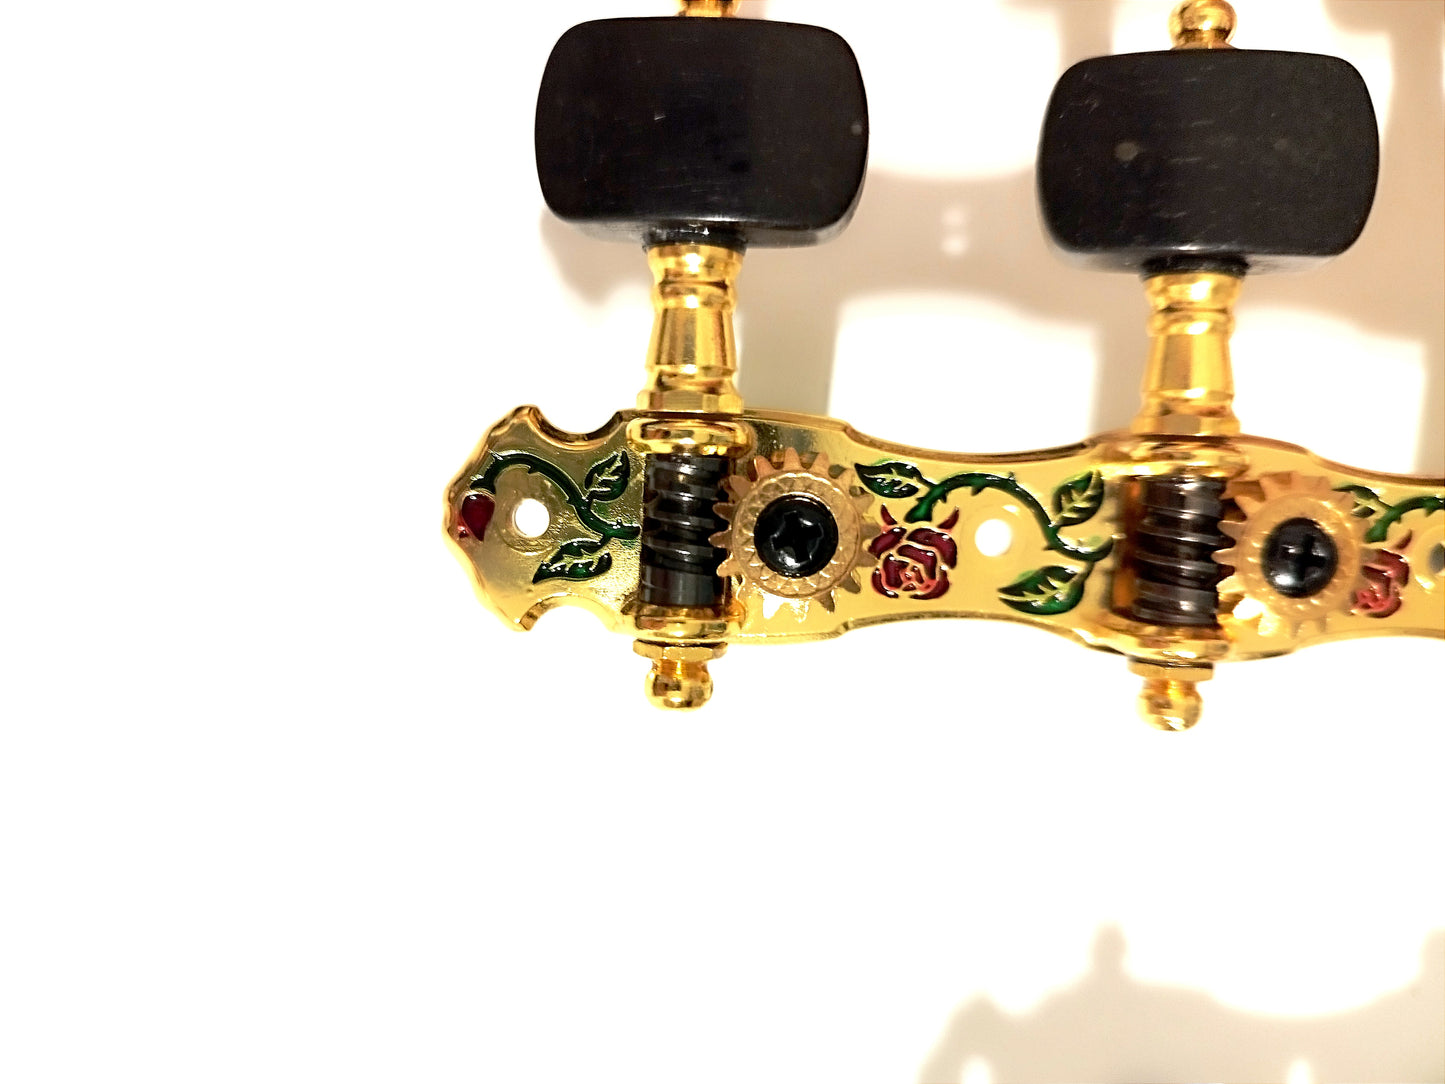 Alice tuners for classical guitar in gold and pegs in black natural ebony, enamelled in 2 colors.